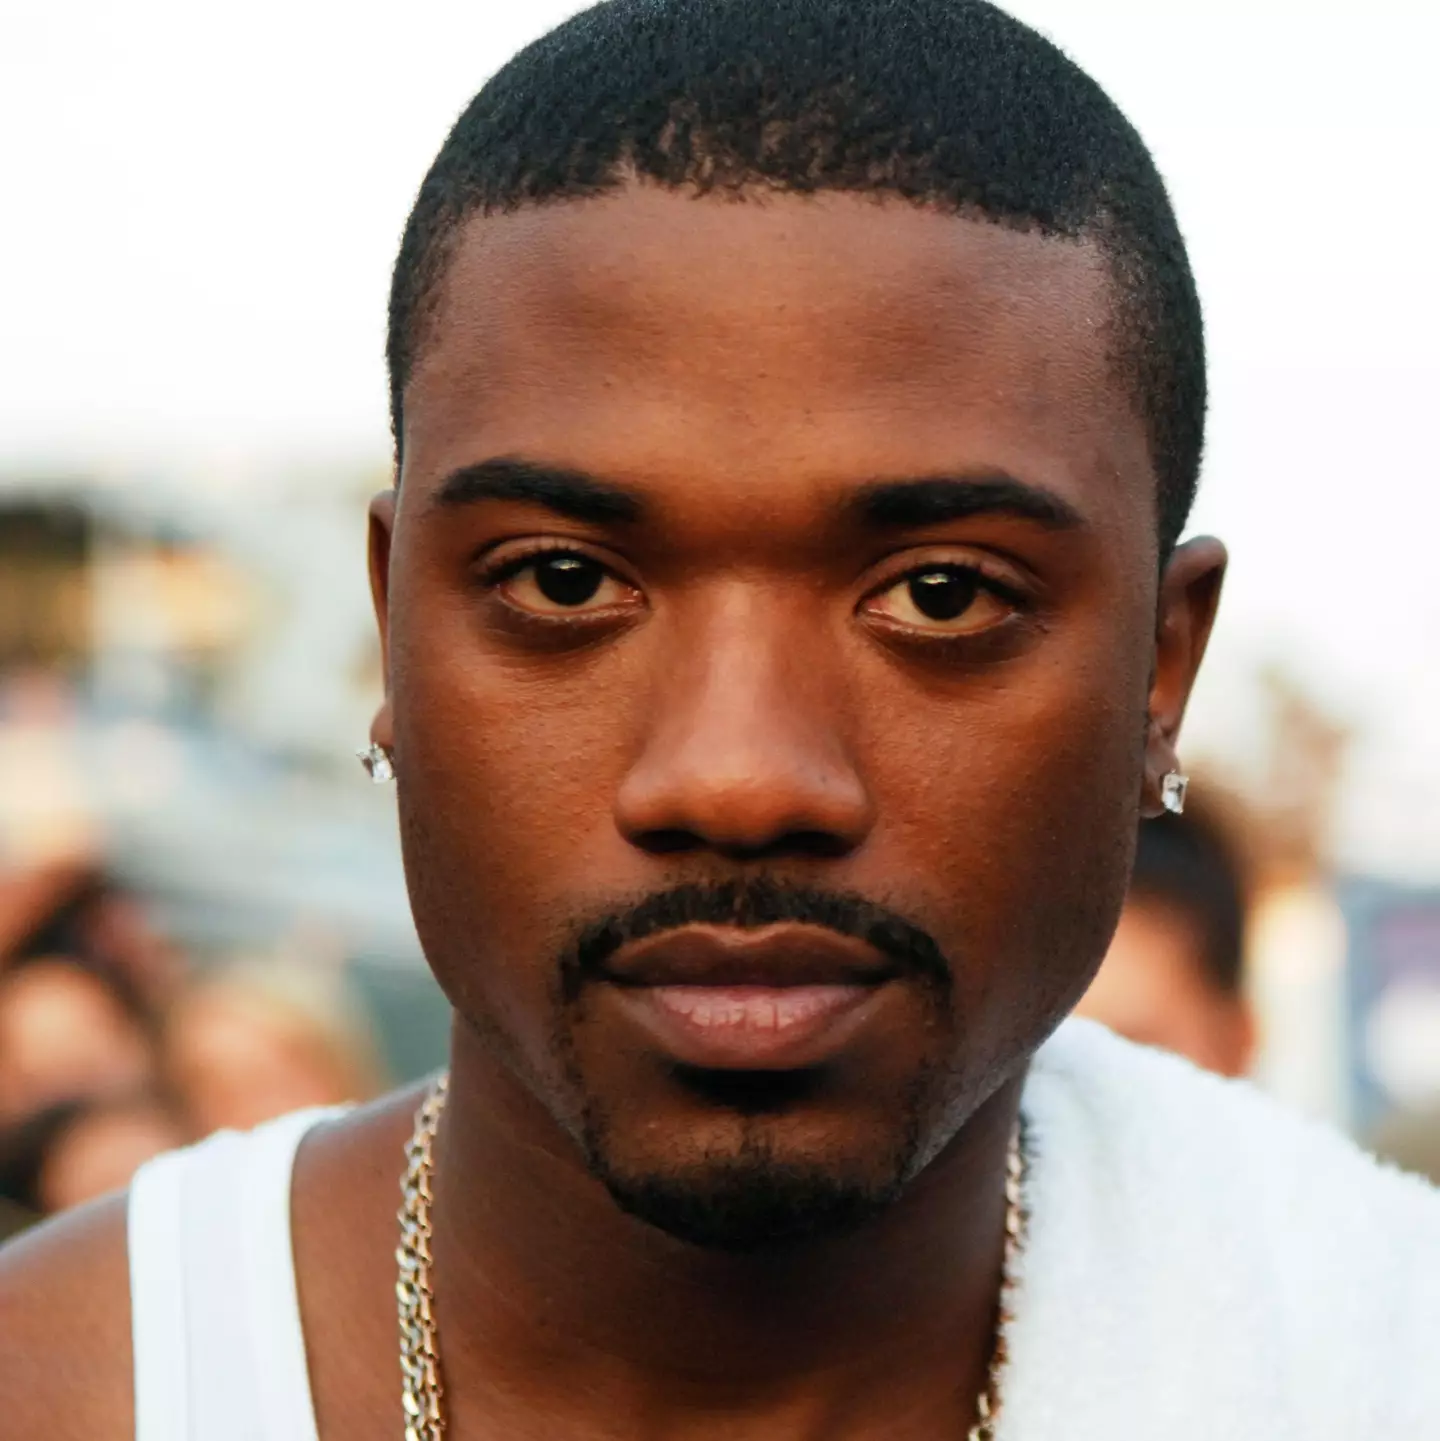 Ray J claims he's lost work because of the tape.